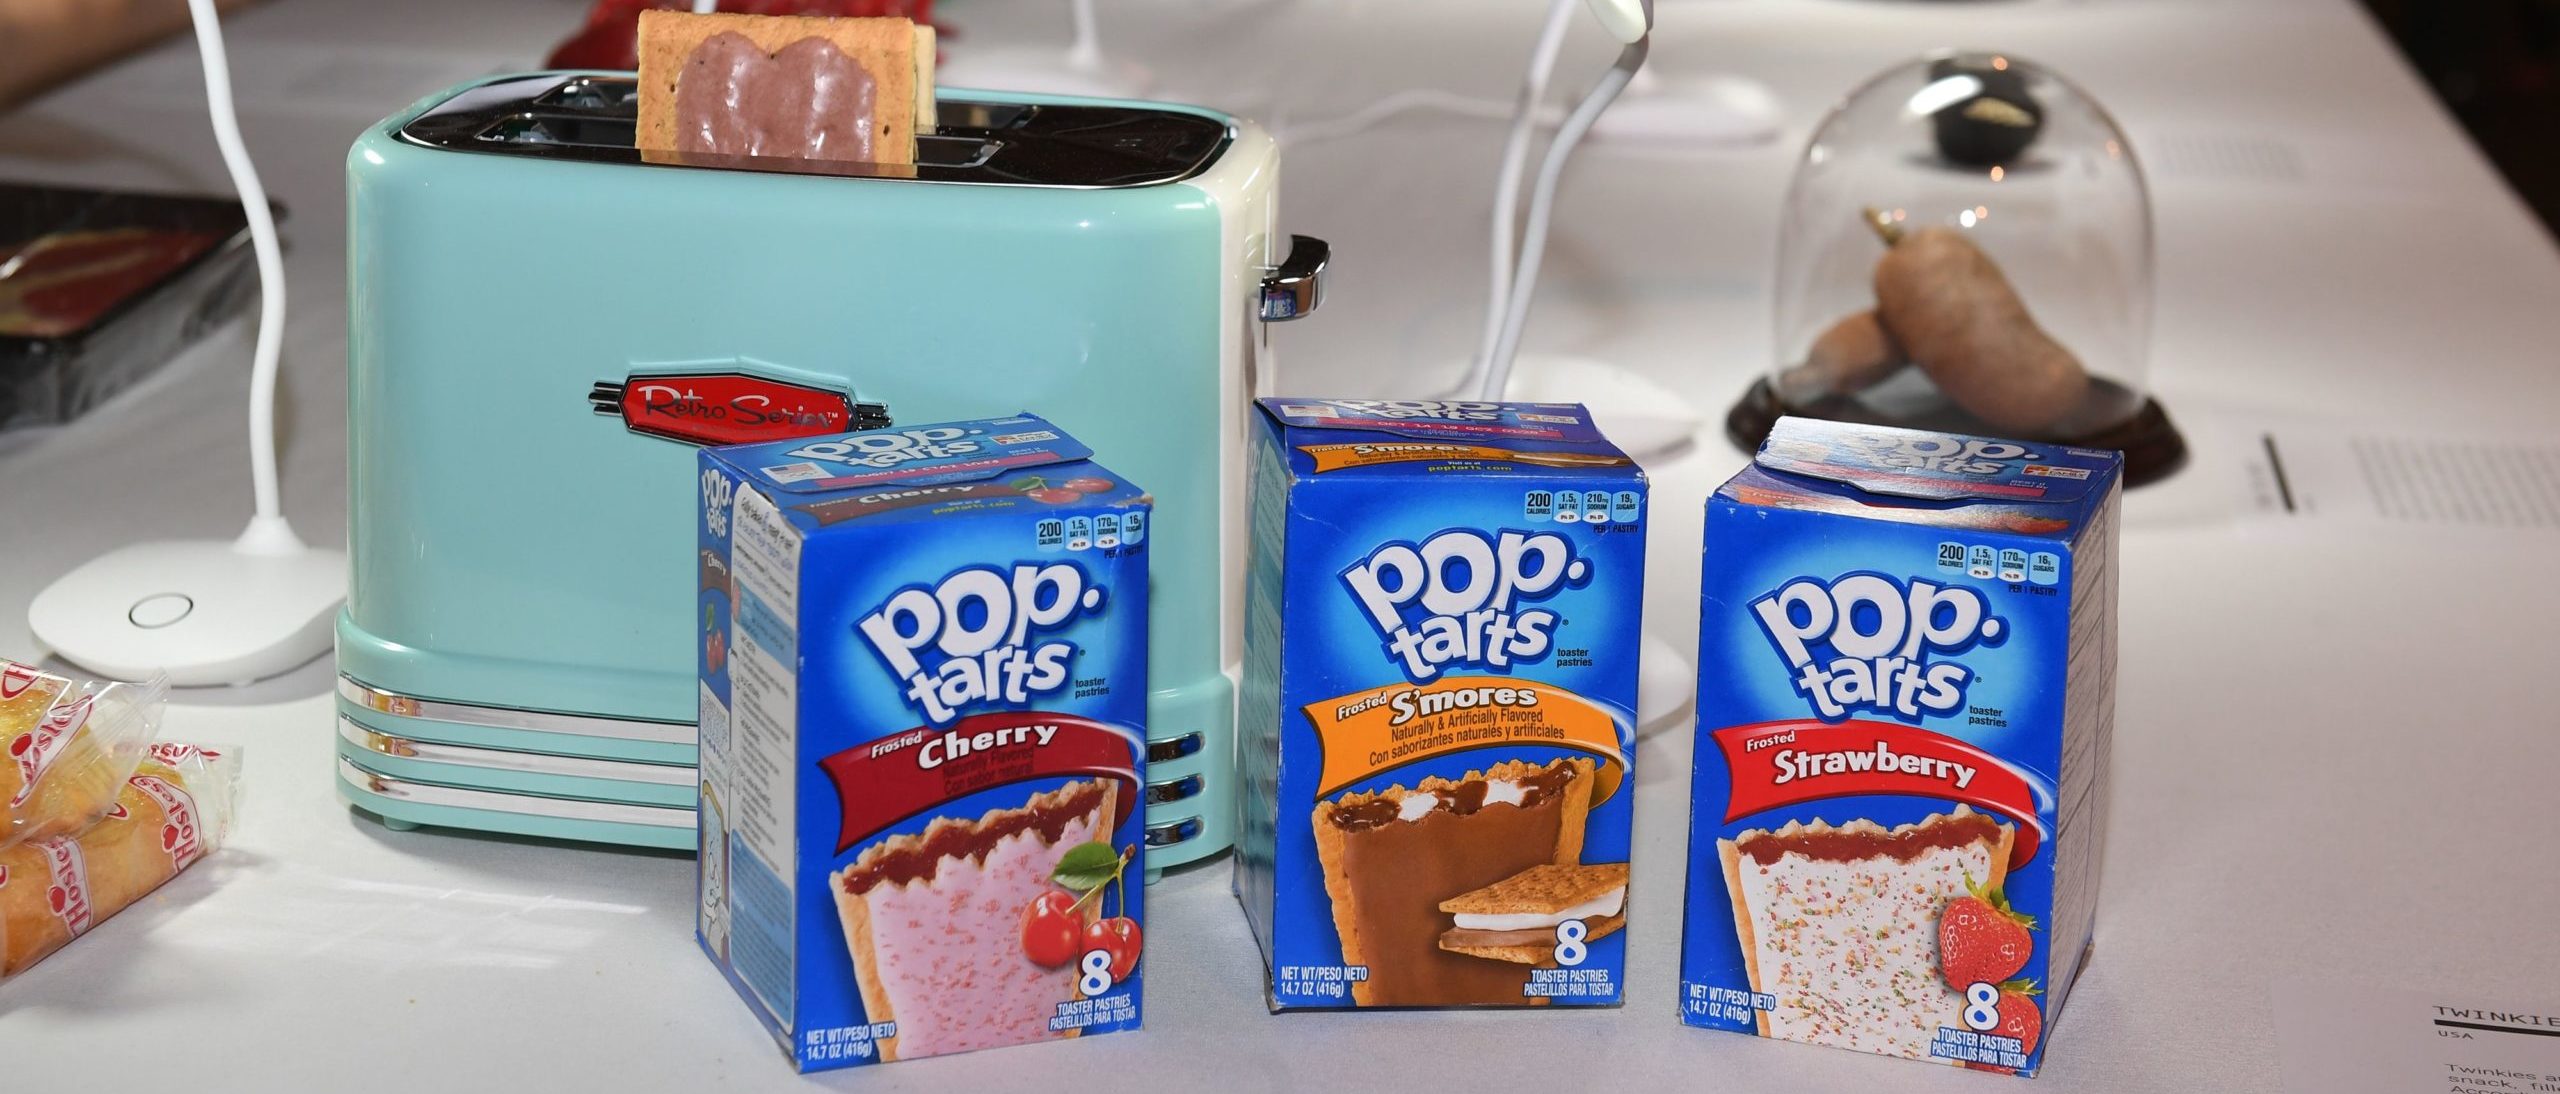 Pop-Tarts Bowl Reveals Their Trophy, And Holy Diabetes, This Thing Is Incredible